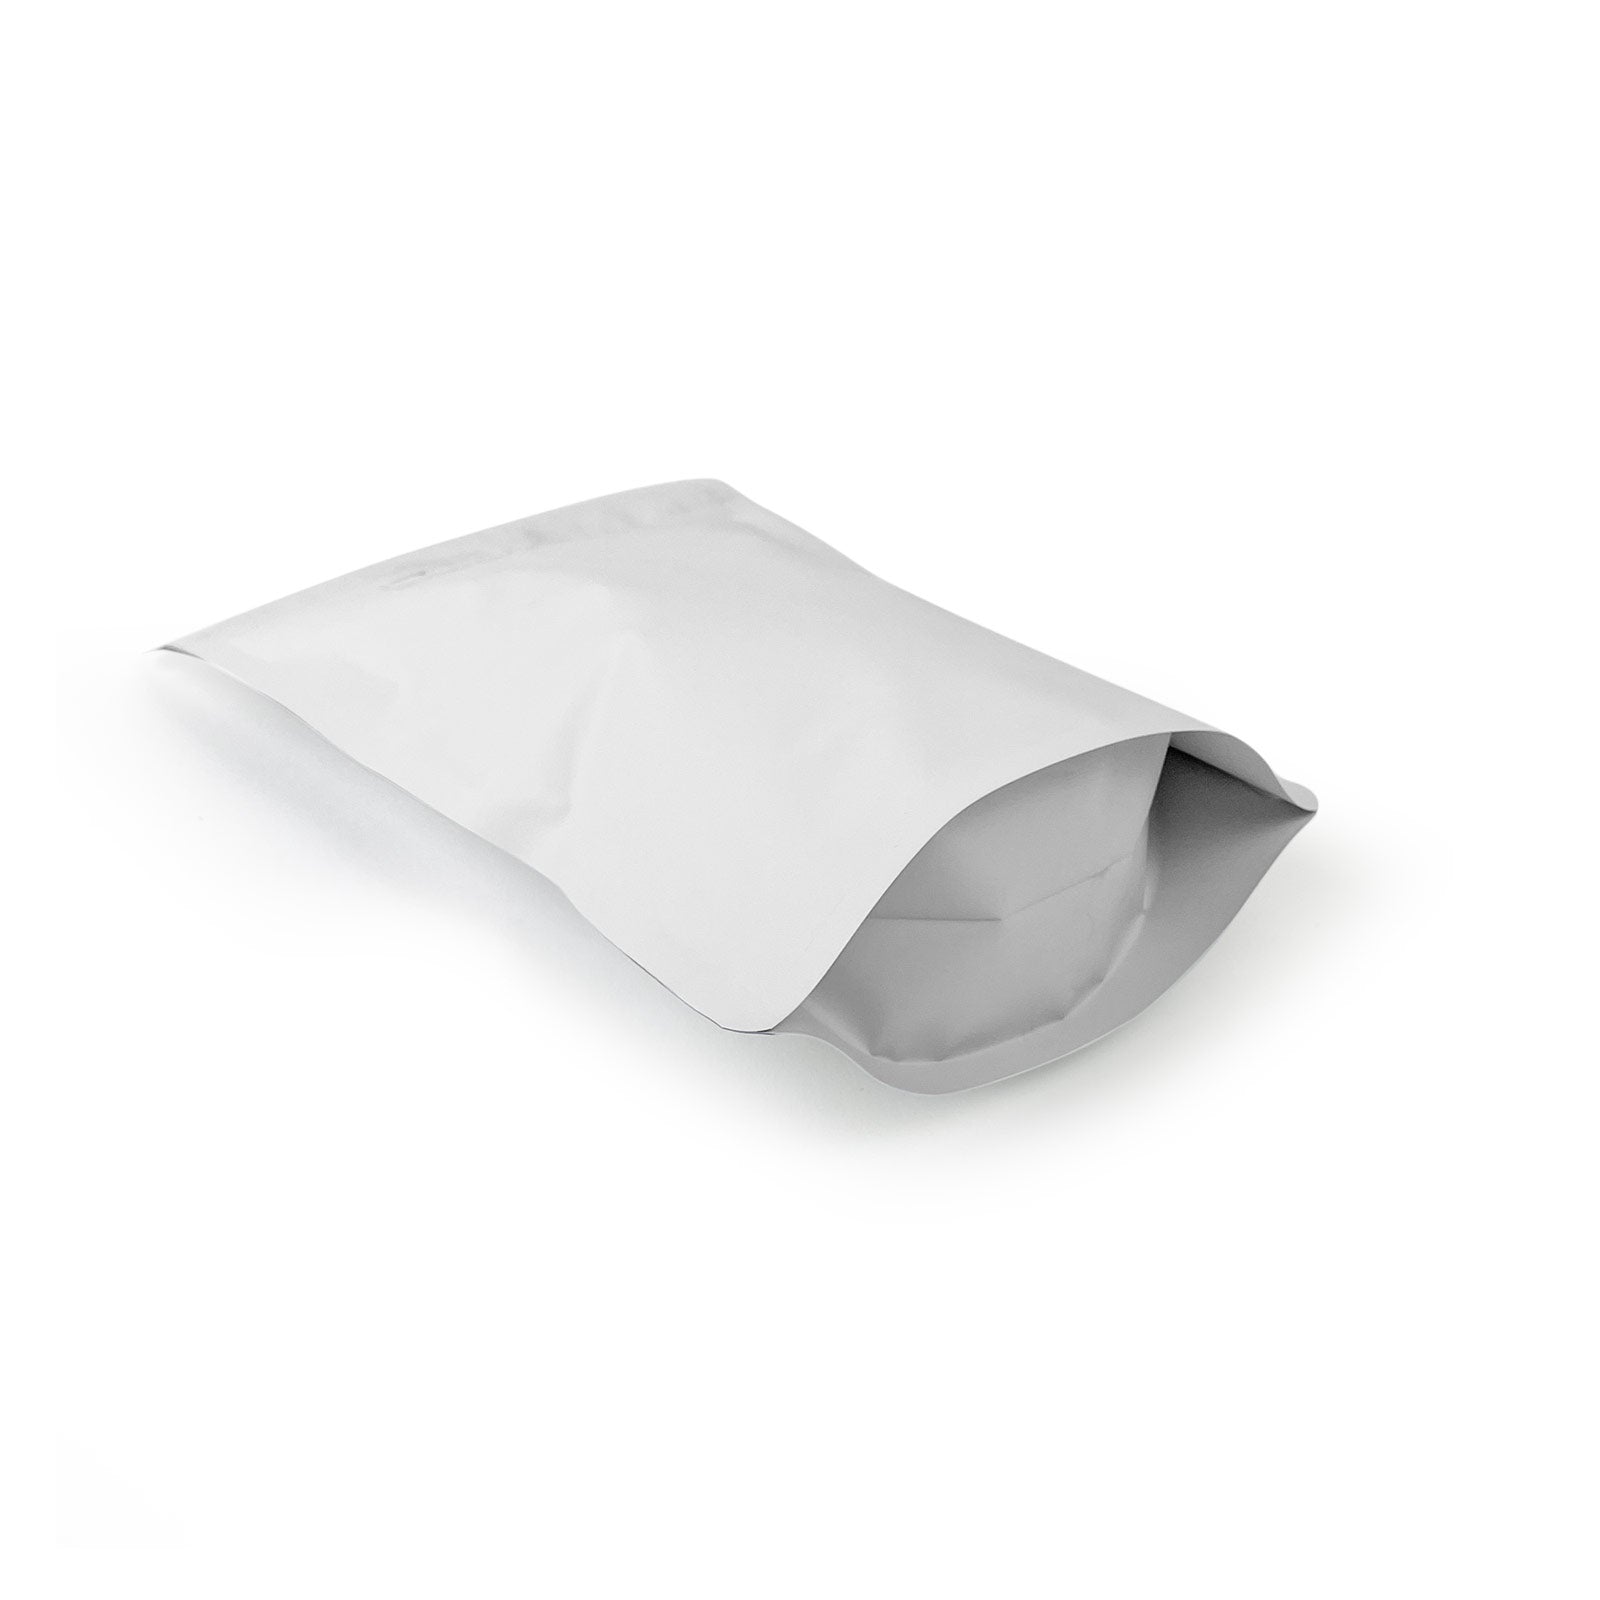 1/2 Ounce Child Resistant Bags All White 5"x8.15"+2.36" - 100 Count